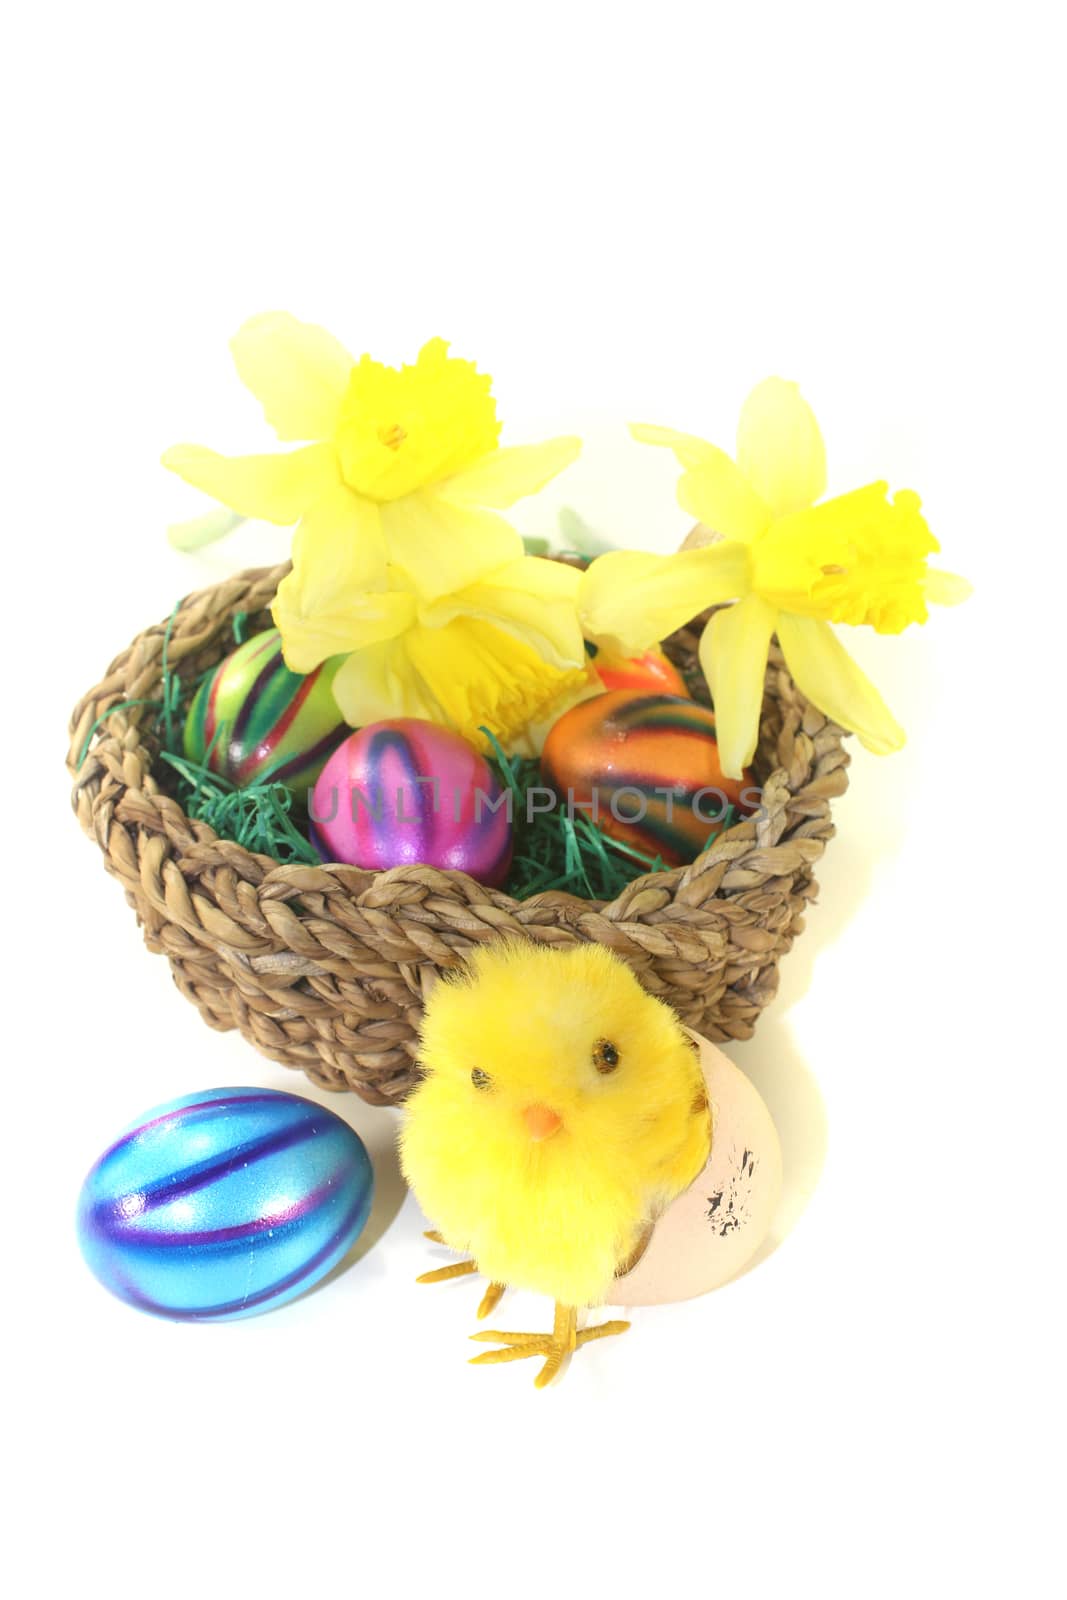 Easter Basket with chick, daffodils and colorful eggs by discovery